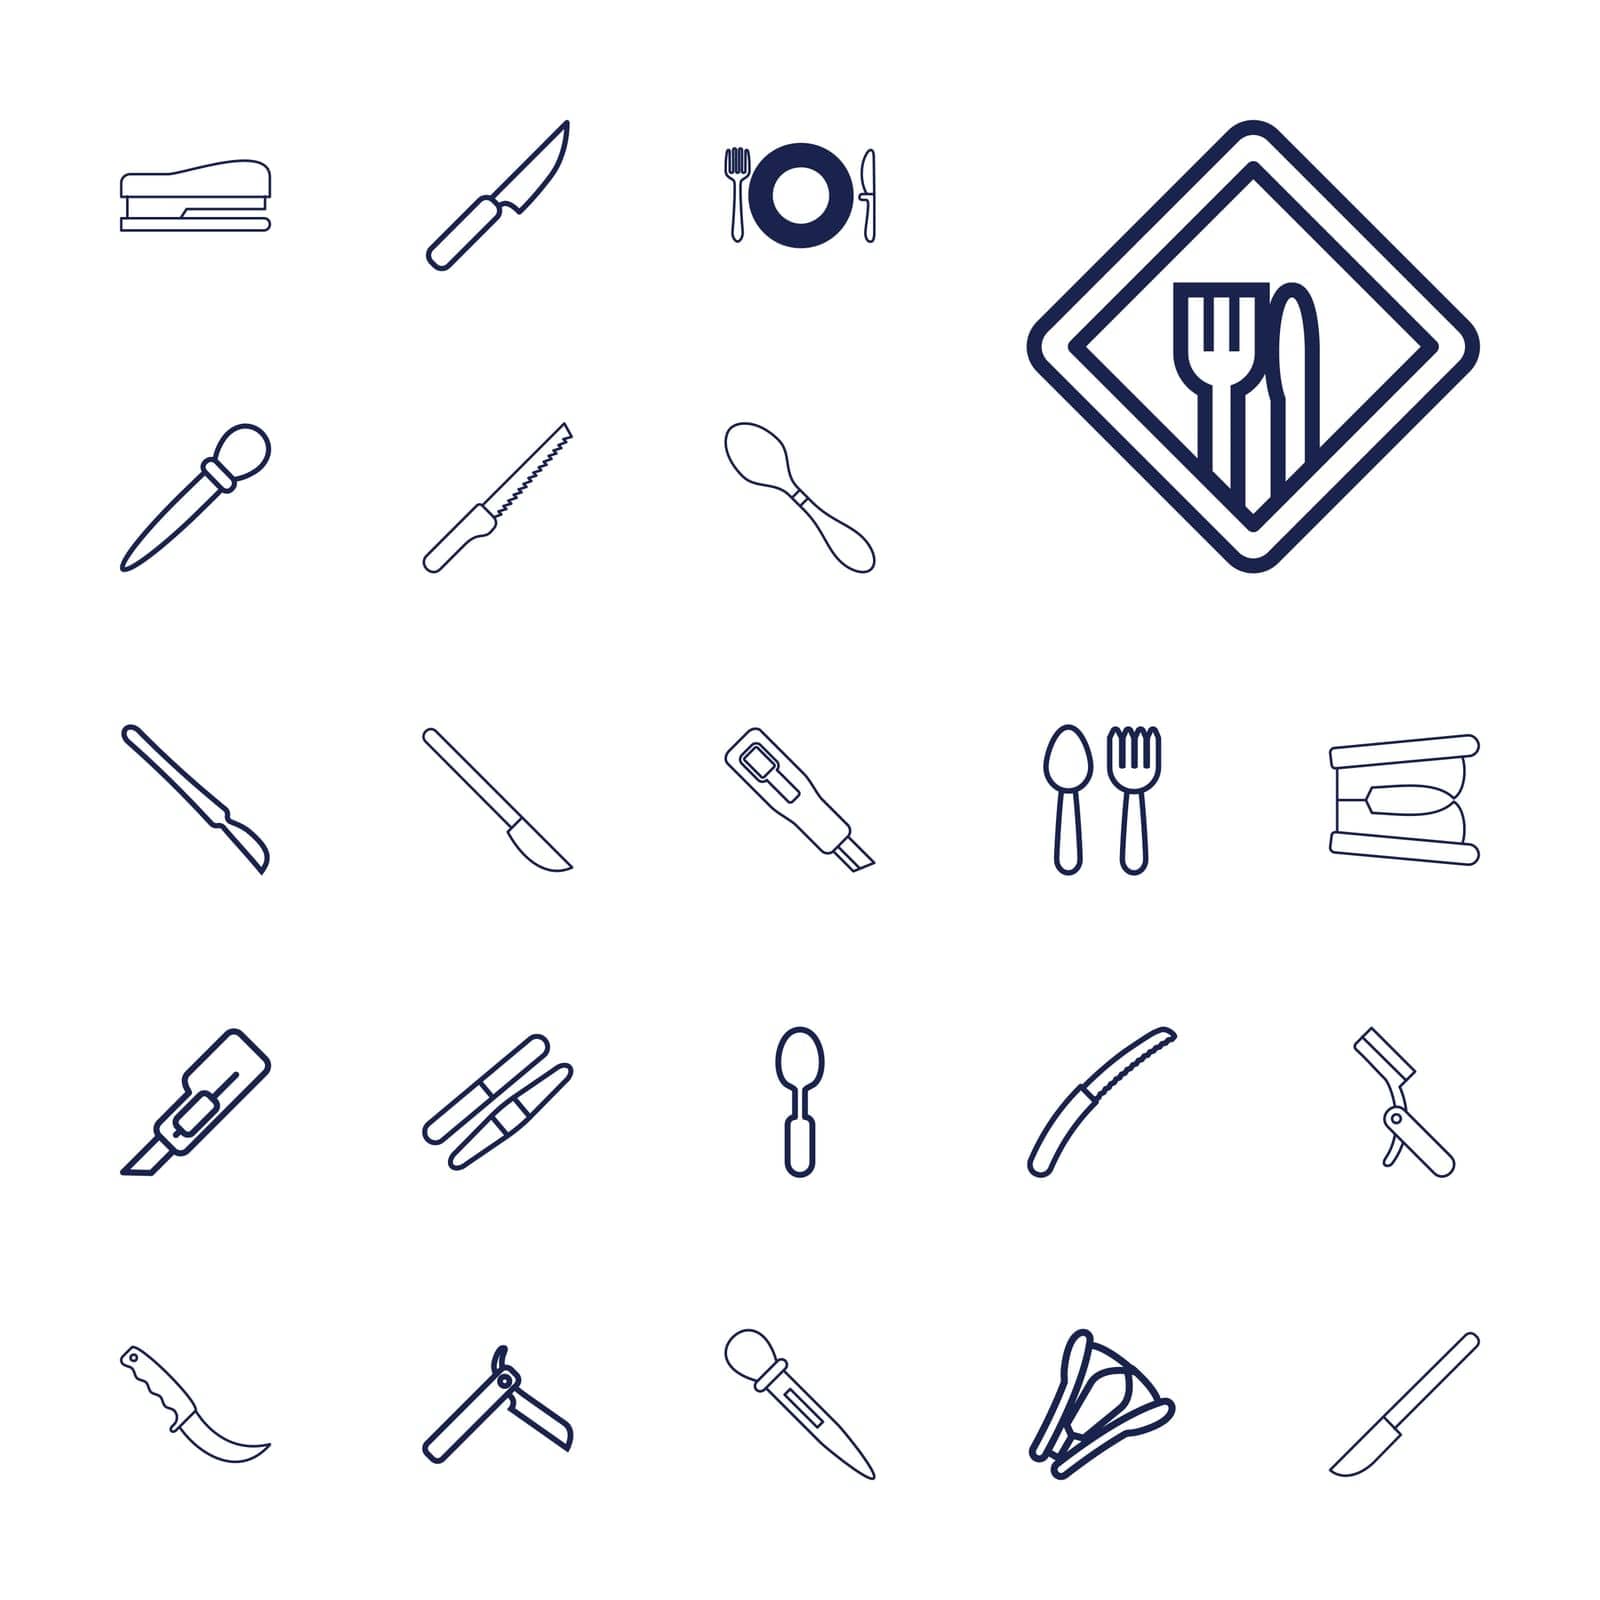 symbol,cut,gardening,icon,sign,isolated,cutter,plate,blade,sawing,white,and,design,spoon,scalpel,vector,cooking,kitchen,bllade,art,set,stapler,nail,restaurant,black,metal,health,equipment,tool,sharp,knife,fork,background,silhouette,razor,illustration,object,care by ogqcorp